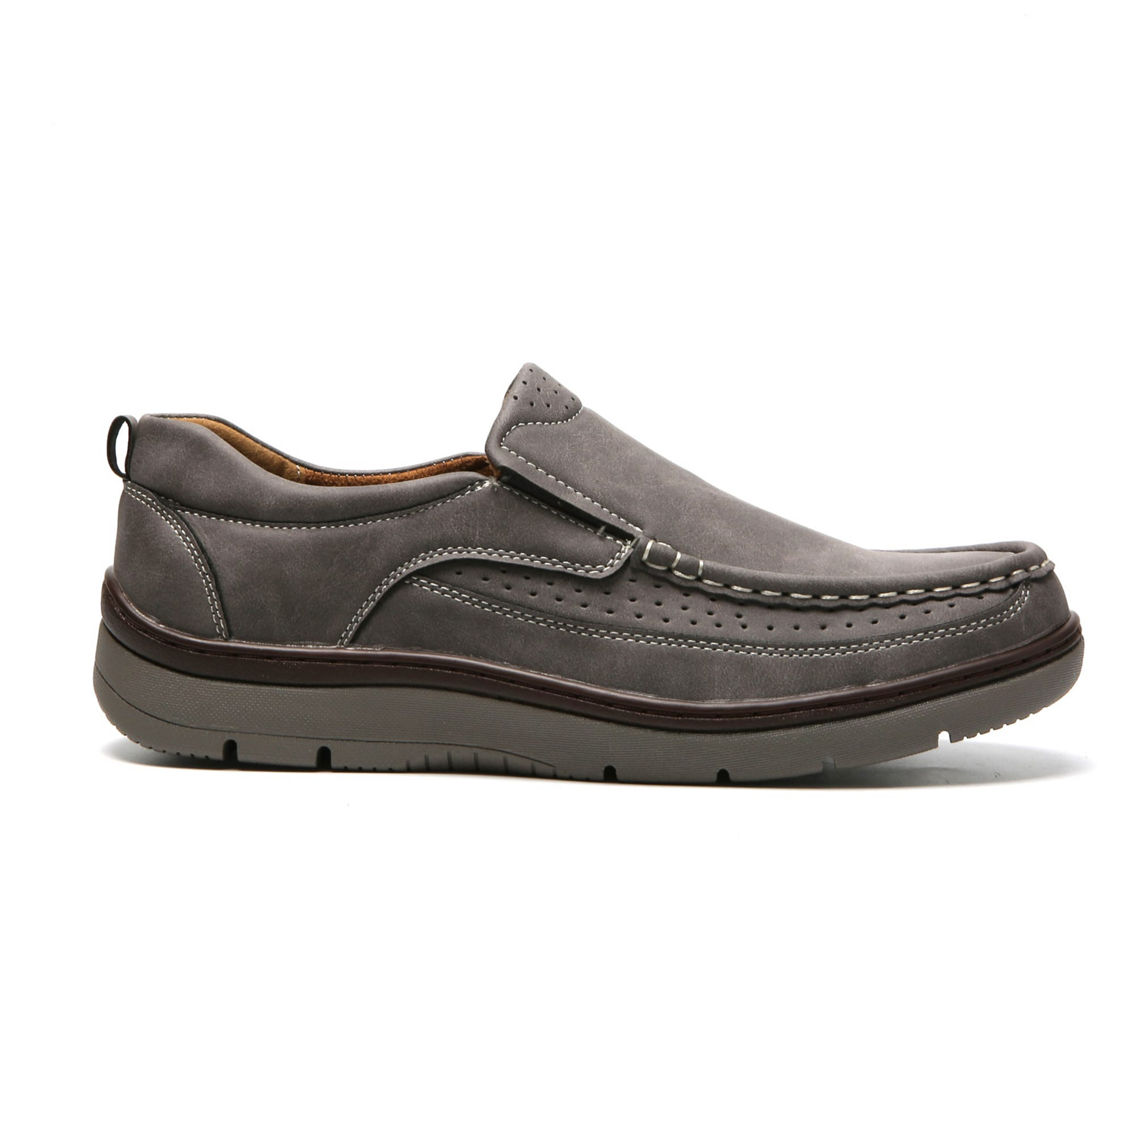 ASTON MARC MEN'S SLIP ON COMFORT CASUAL SHOES - Image 2 of 5